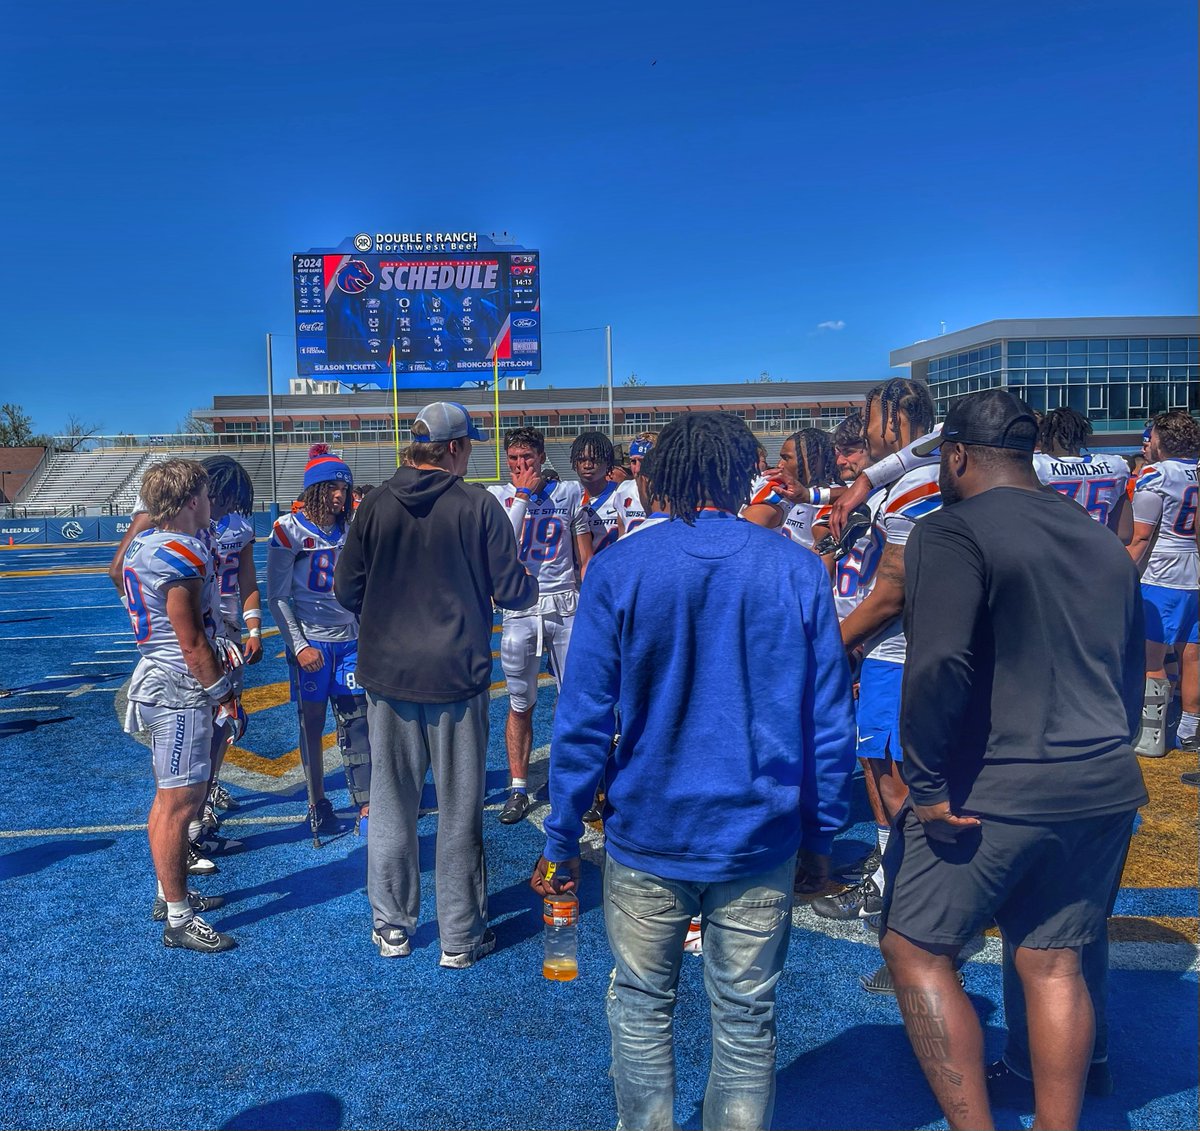 Had a Great Time at the @BroncoSportsFB spring game. Will be back very soon #BleedBlue #2025 @2mattmiller @kyleyoung_BSU @Coach_SD @Coach_B_Jones_